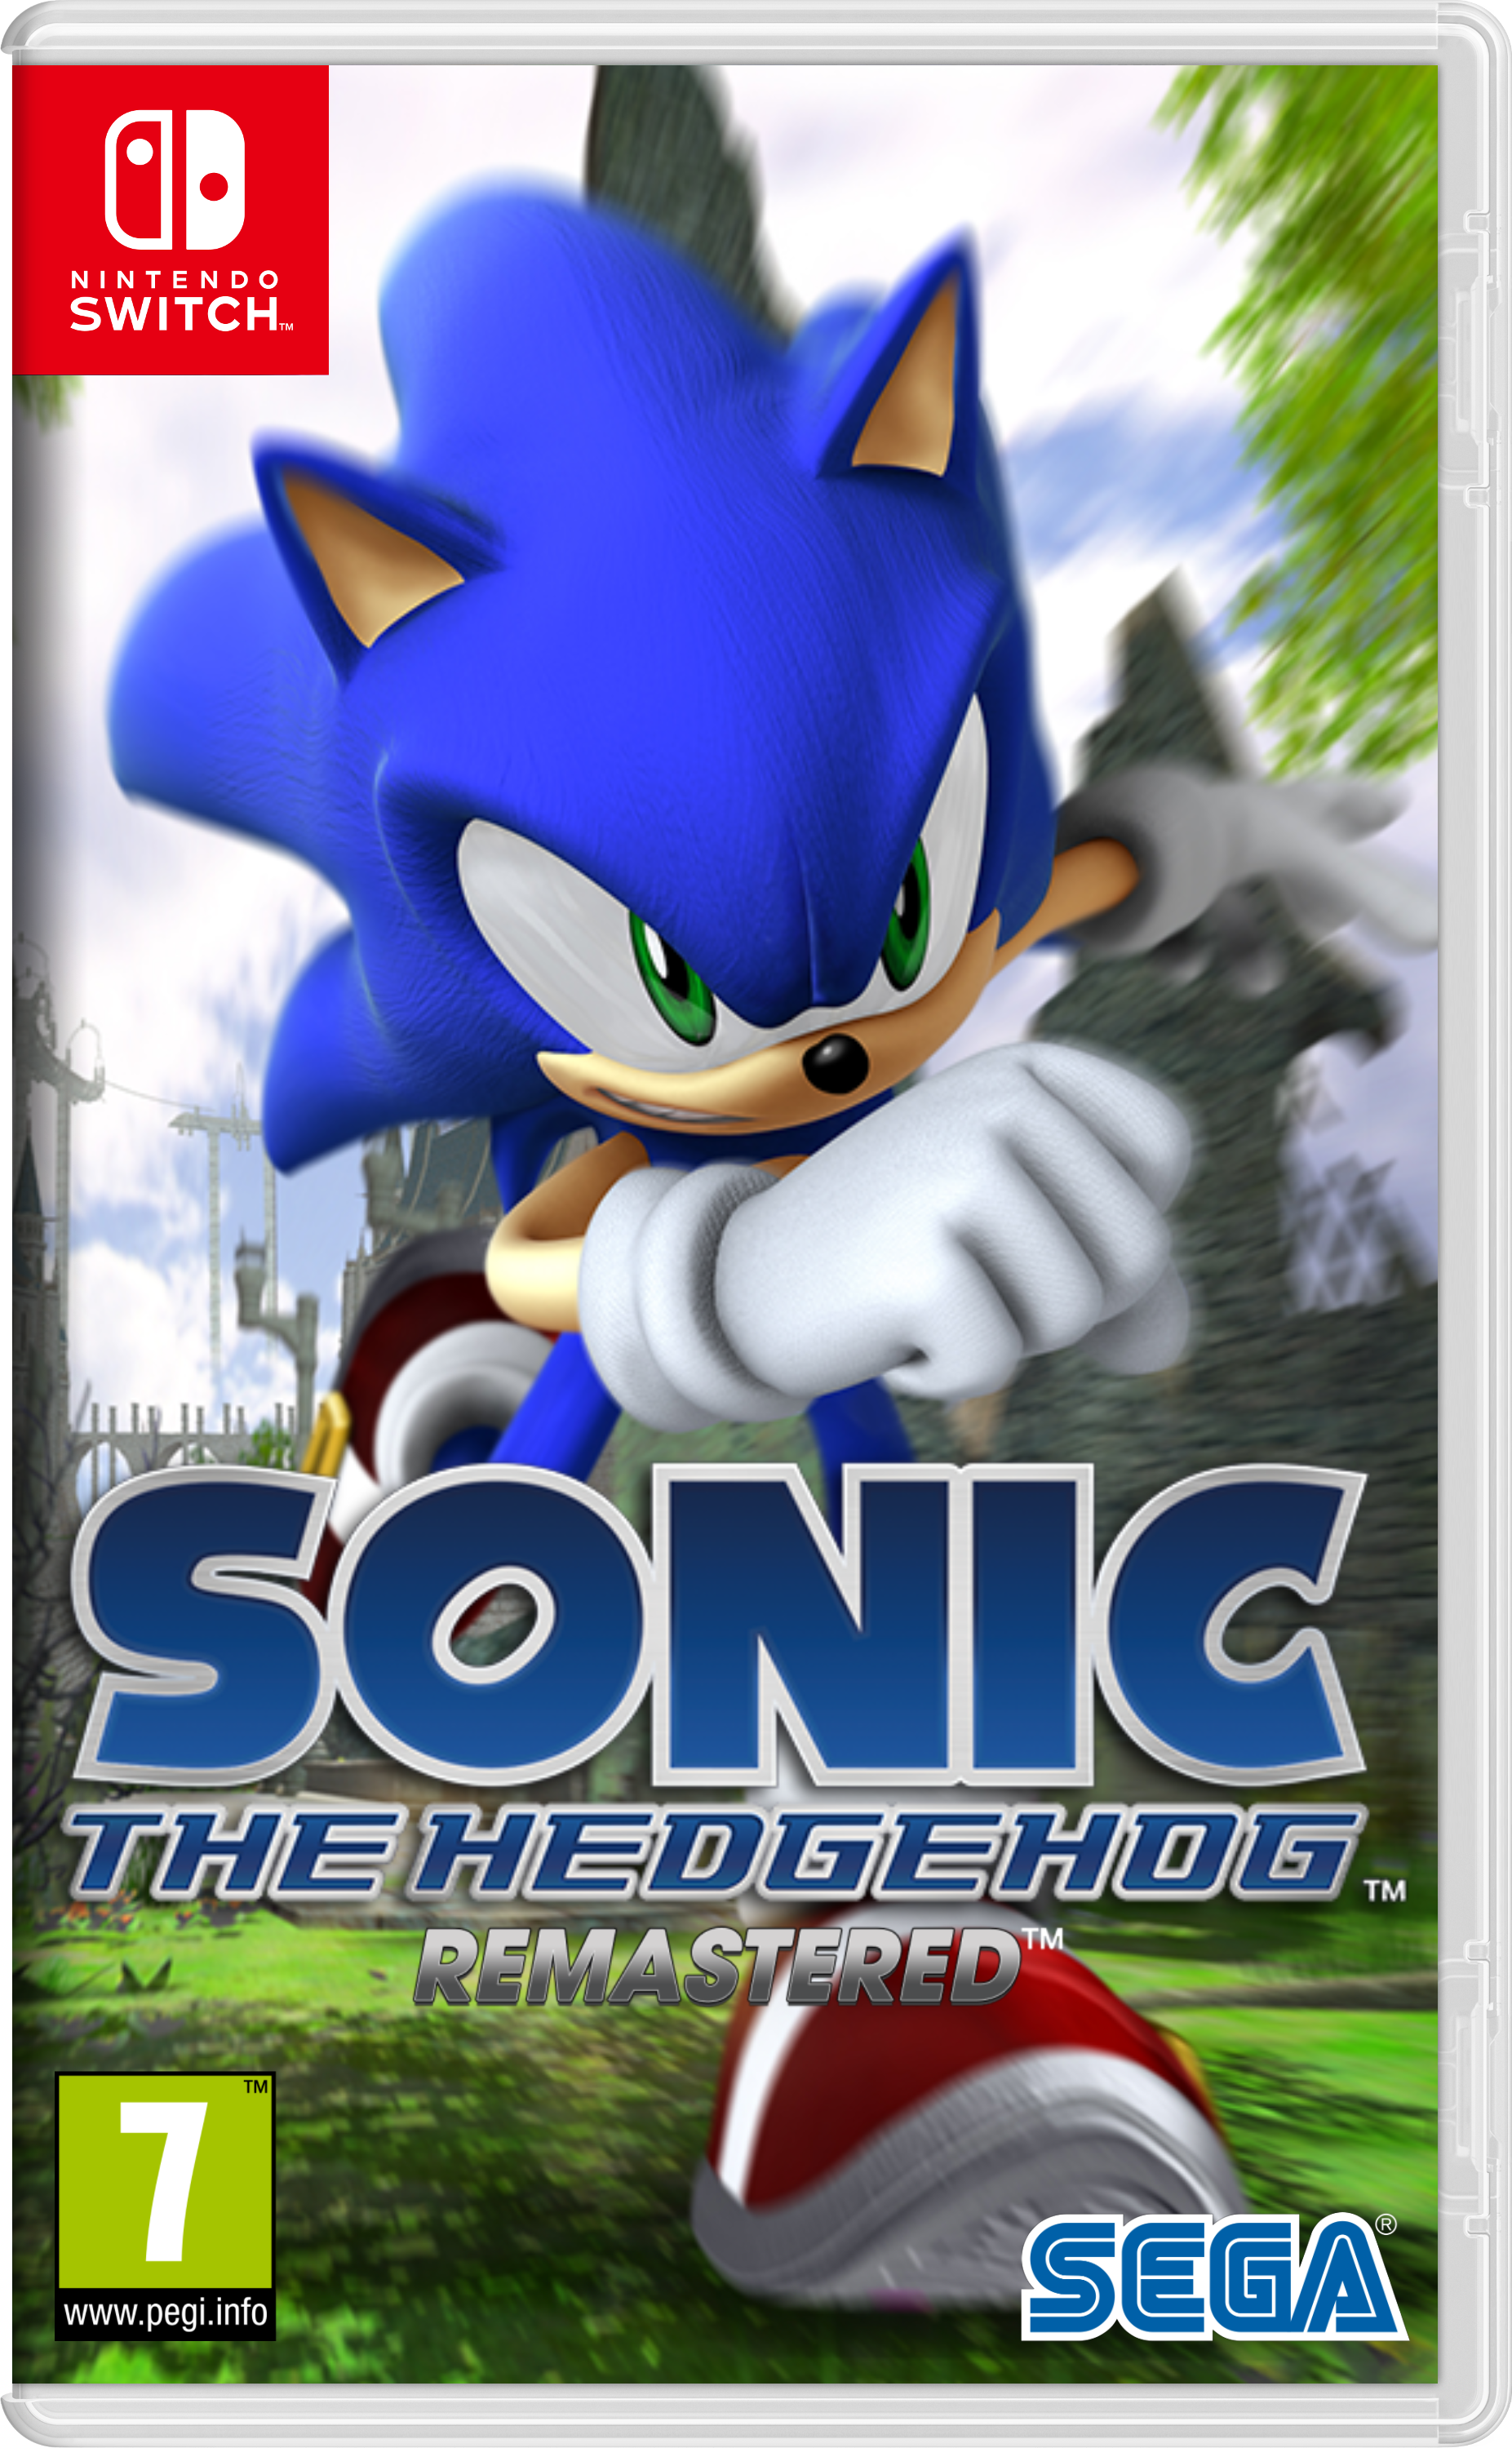 Sonic The Hedgehog Remastered Box Art (2024) by Danyviani on DeviantArt